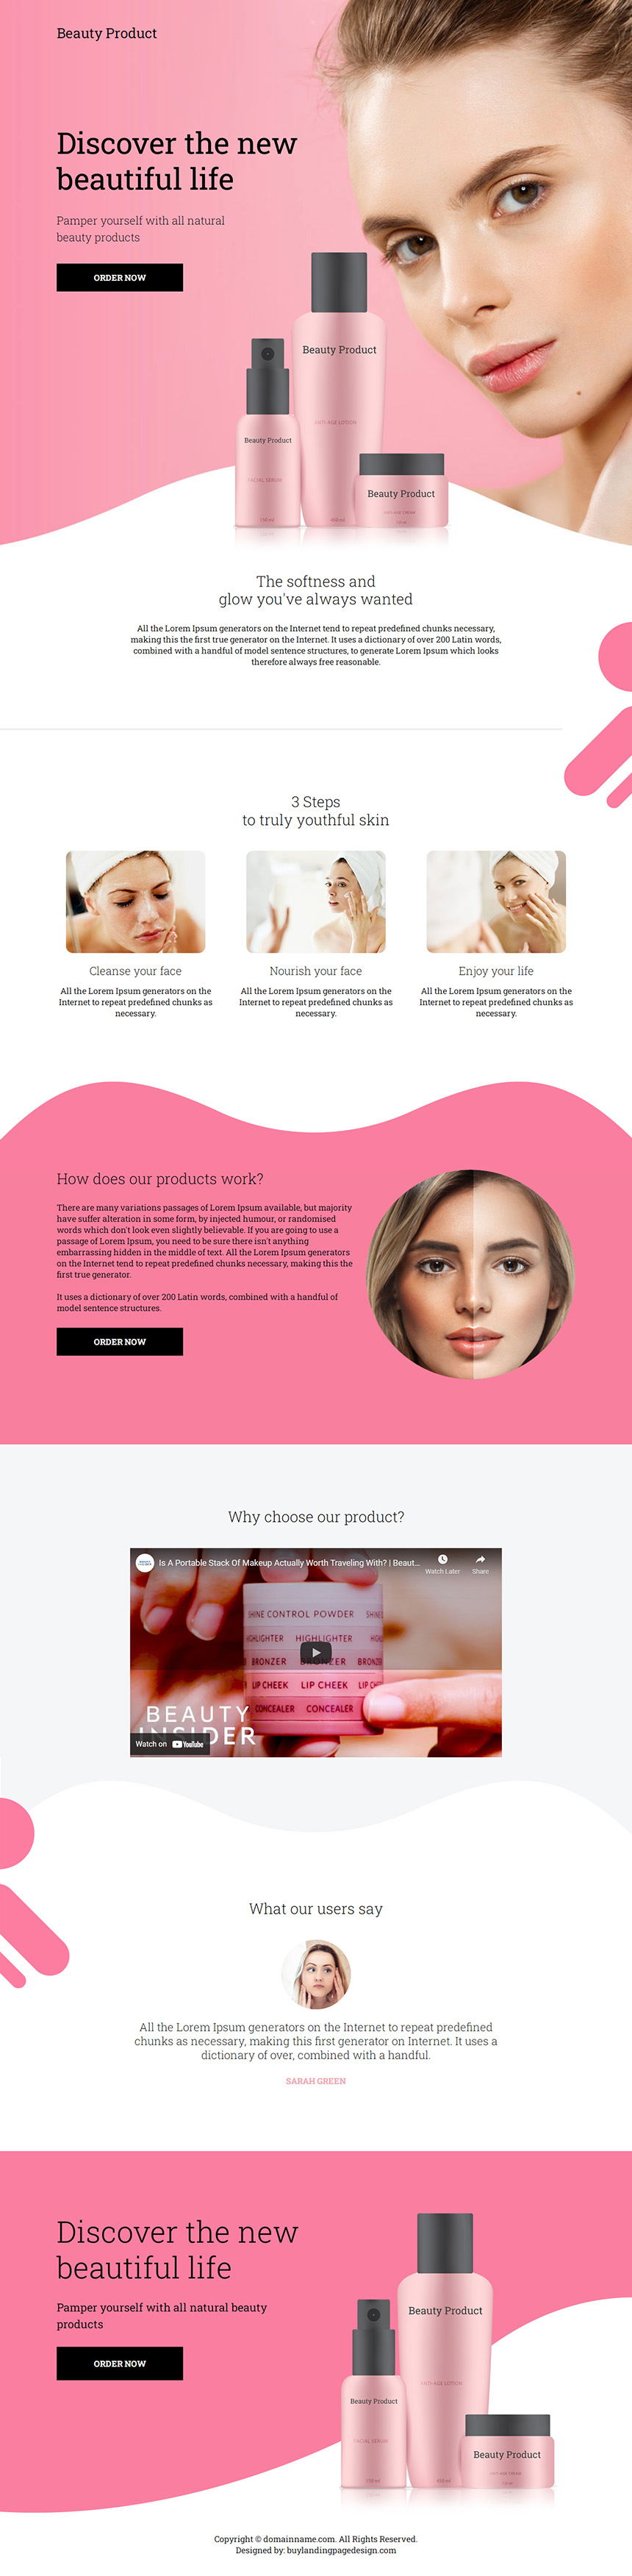 natural beauty products selling responsive landing page design